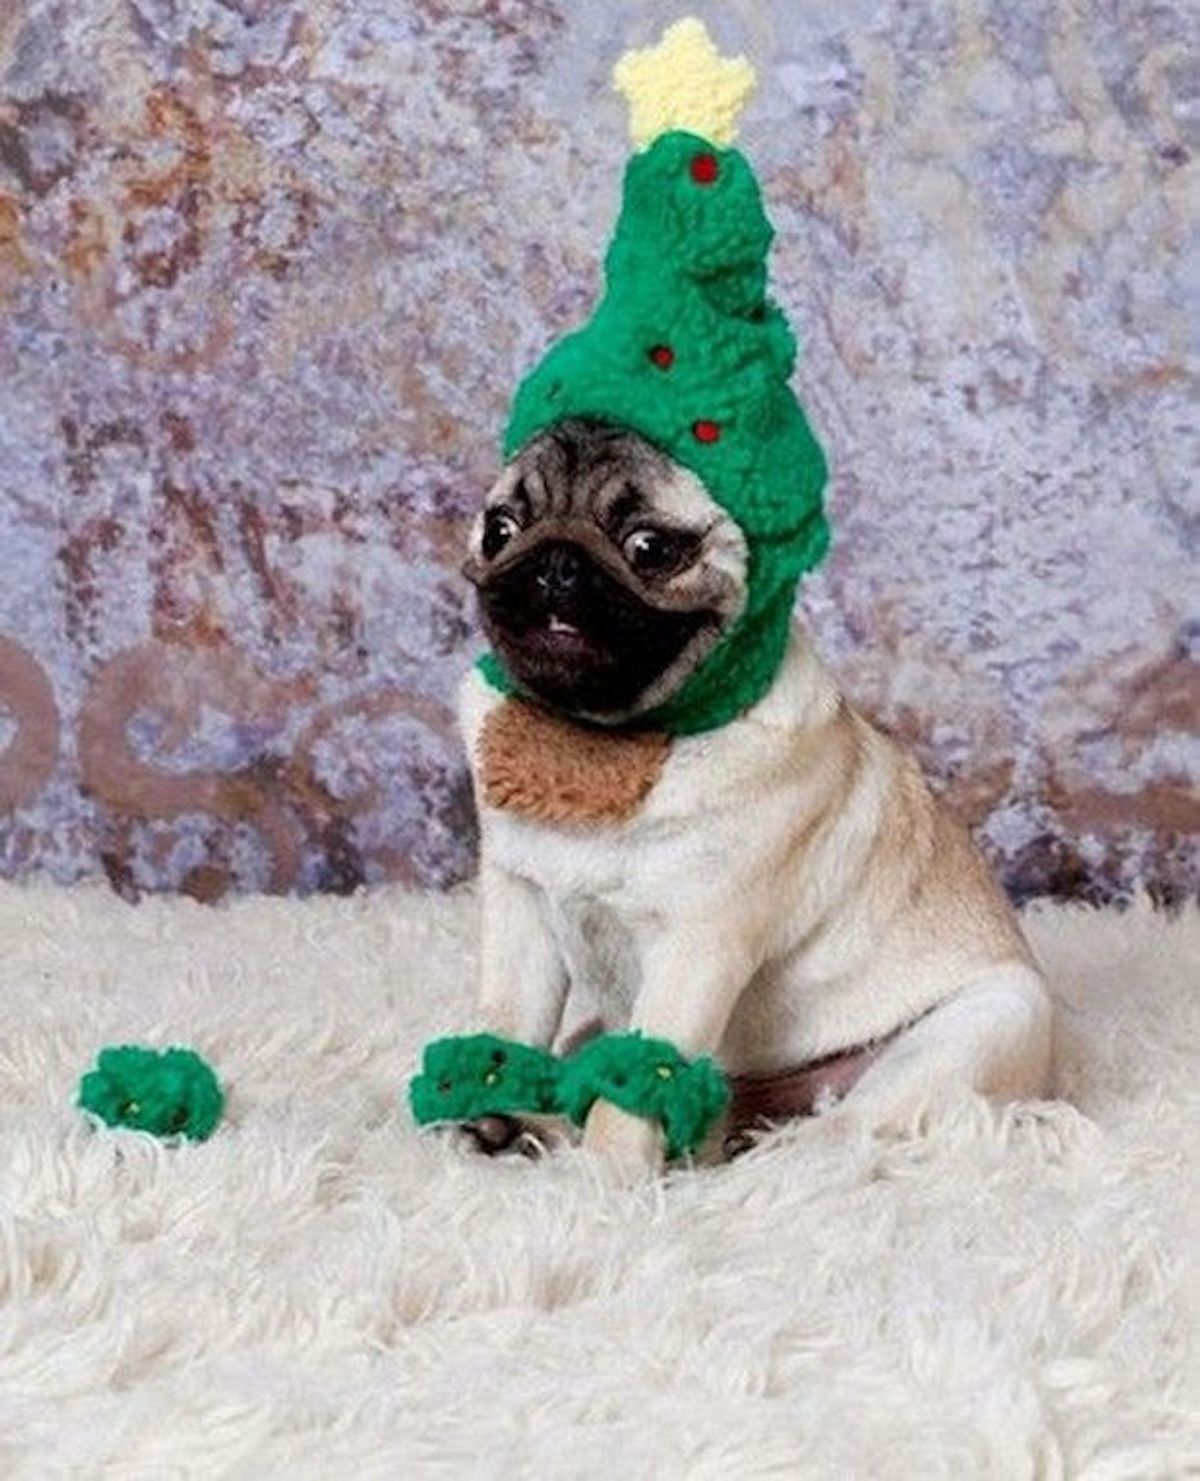 Finals Week as Explained Through a Series of Dogs in Christmas Outfits